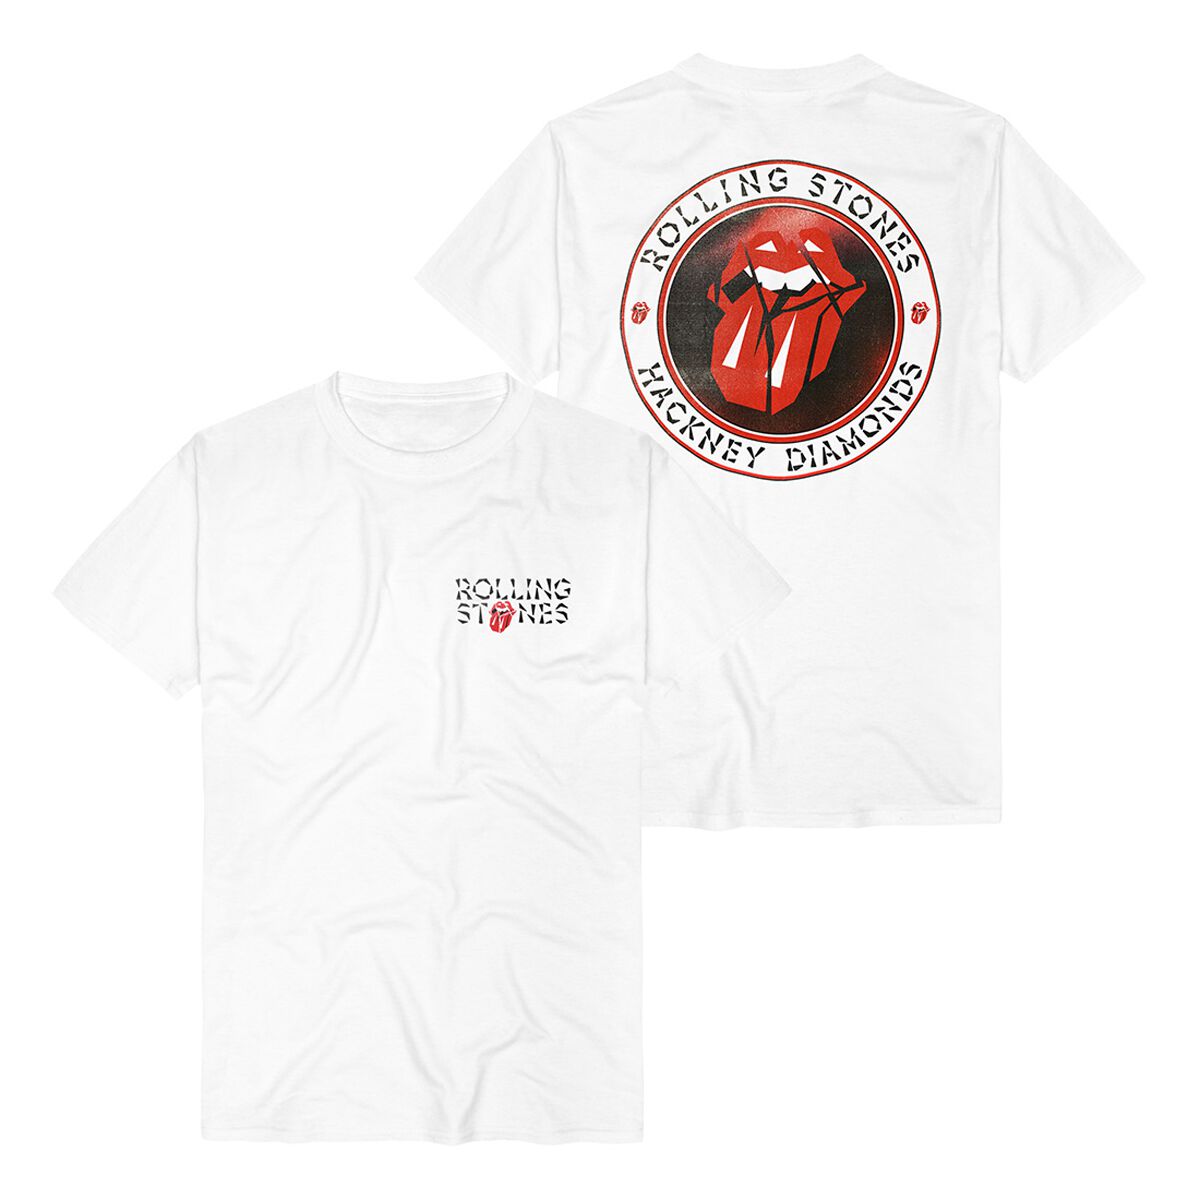 The Rolling Stones Hackney Diamonds Circle Label T-Shirt weiß in M